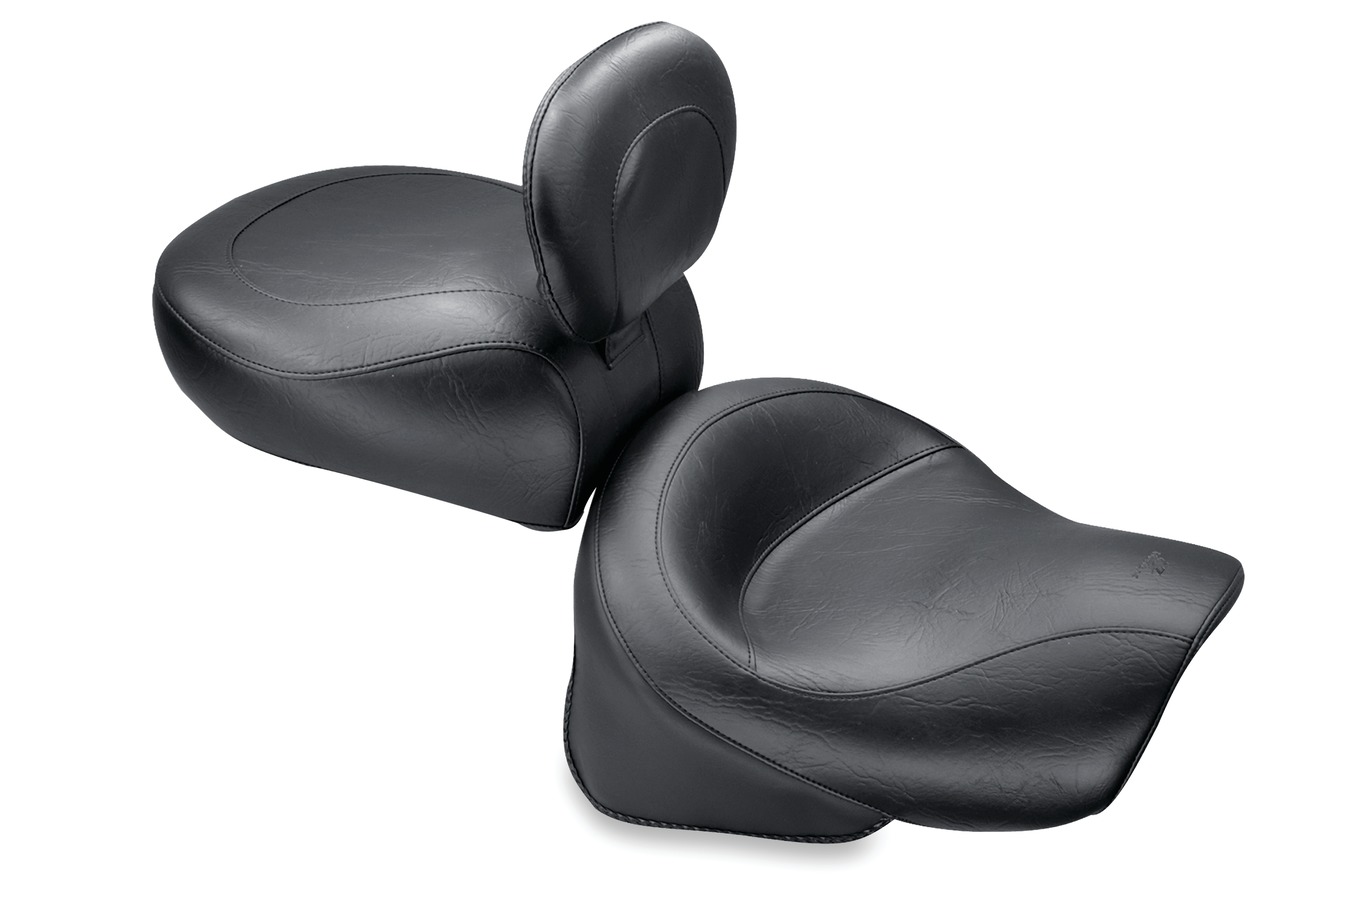 Standard Touring Two-Piece Seat with Driver Backrest for Kawasaki Vulcan 1500 Classic FI 2000-